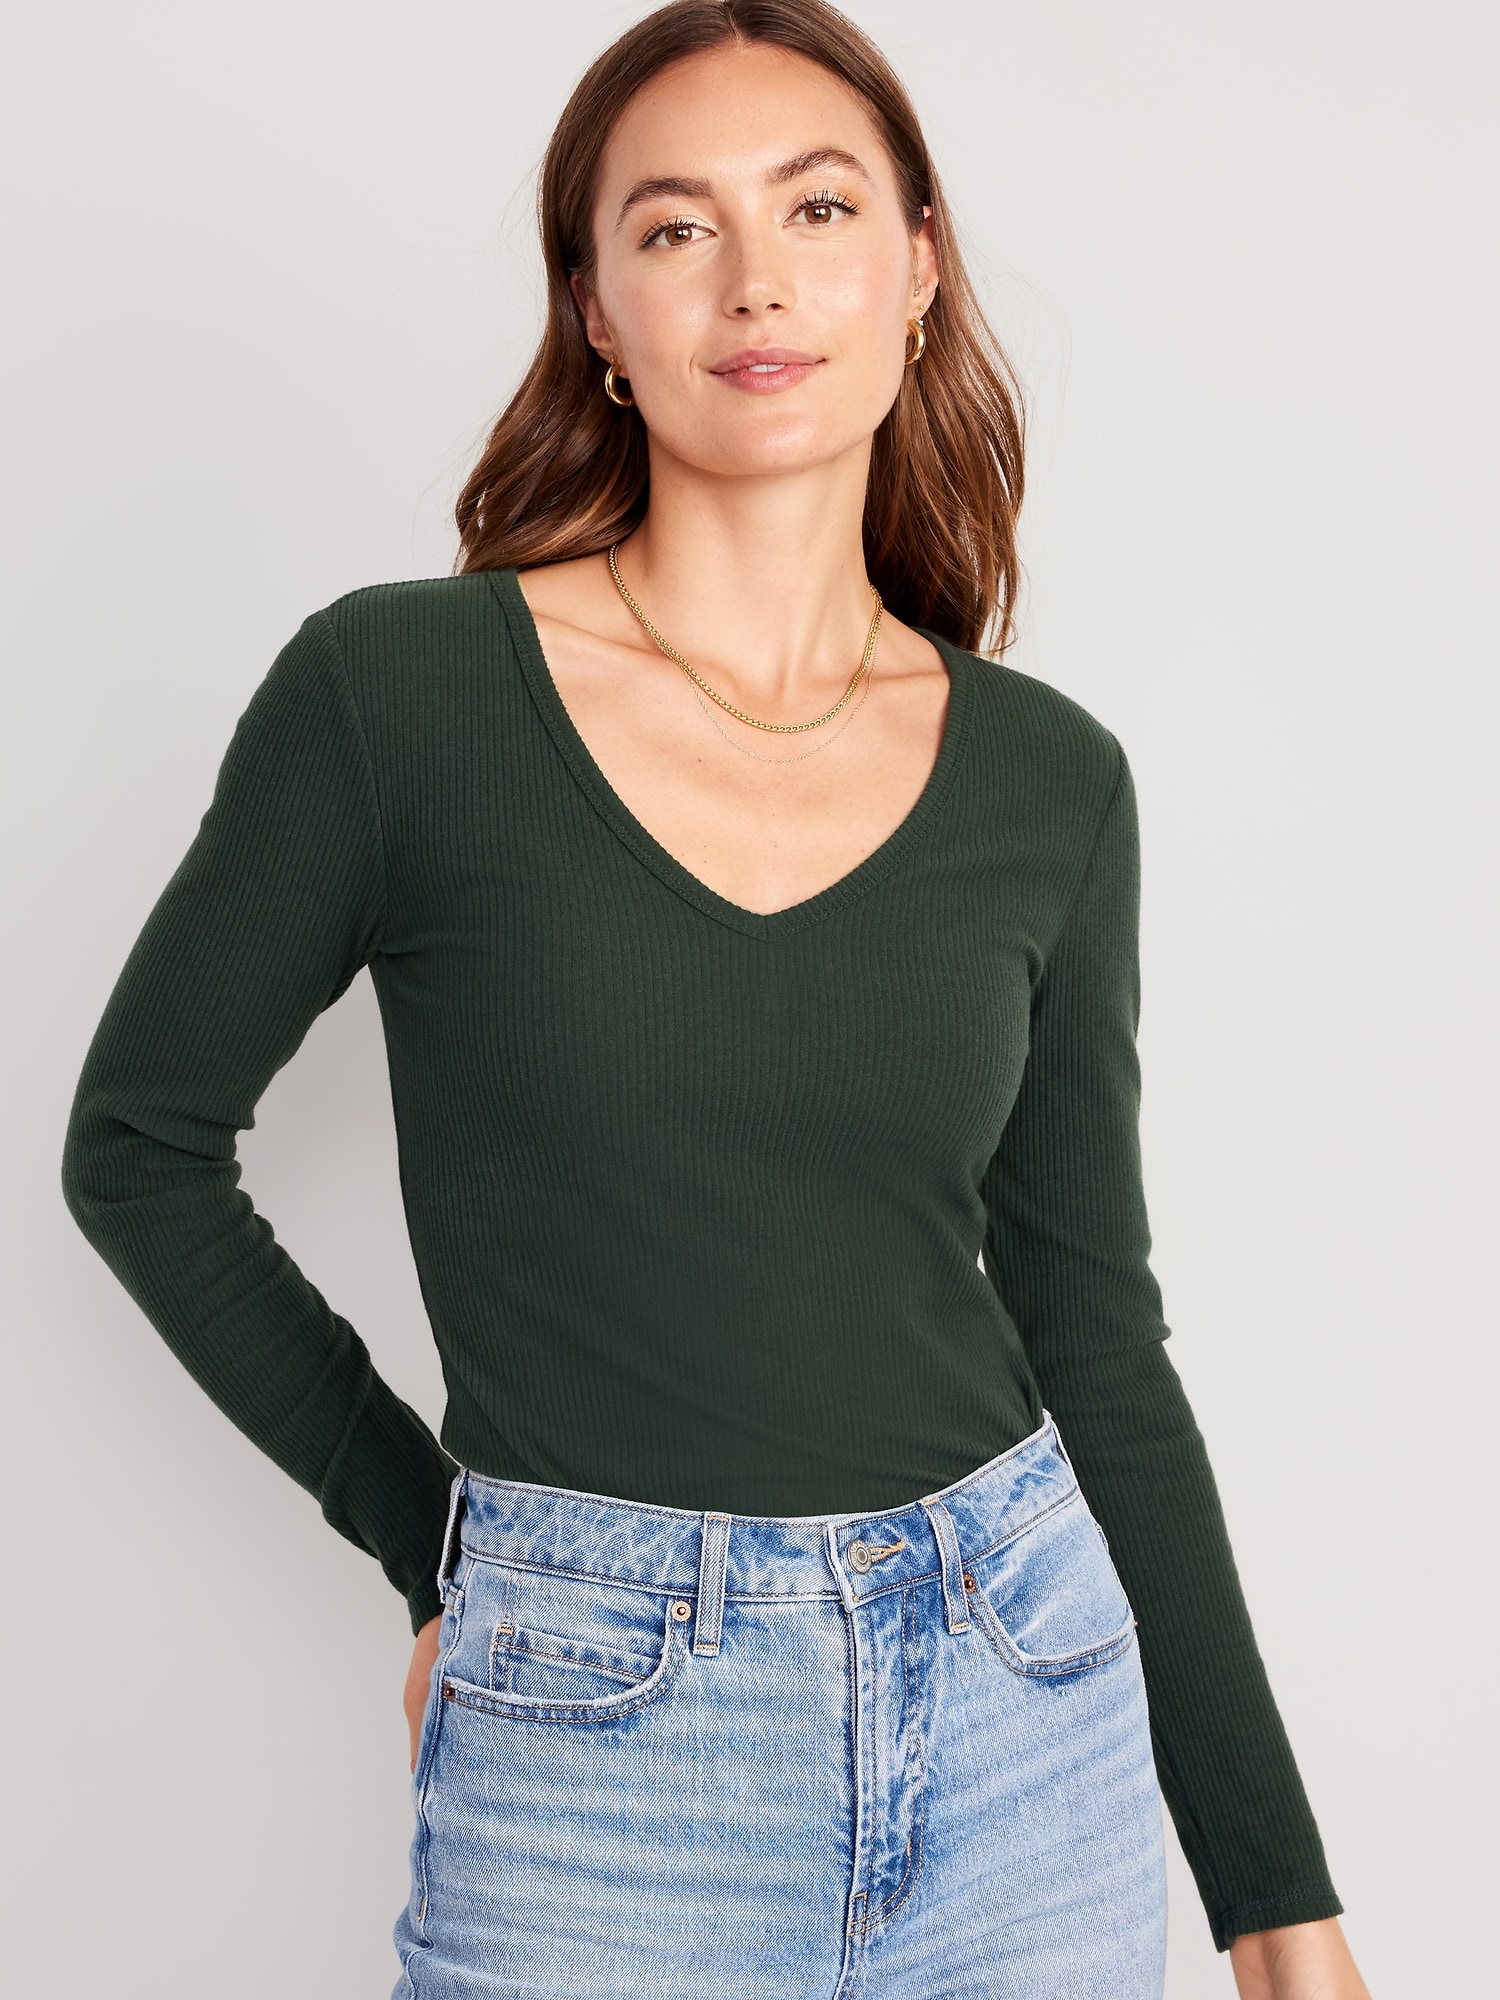 Women's V Neck Ribbed Crop Top Long Sleeve Pullover Casual Loose T-shirt Tee